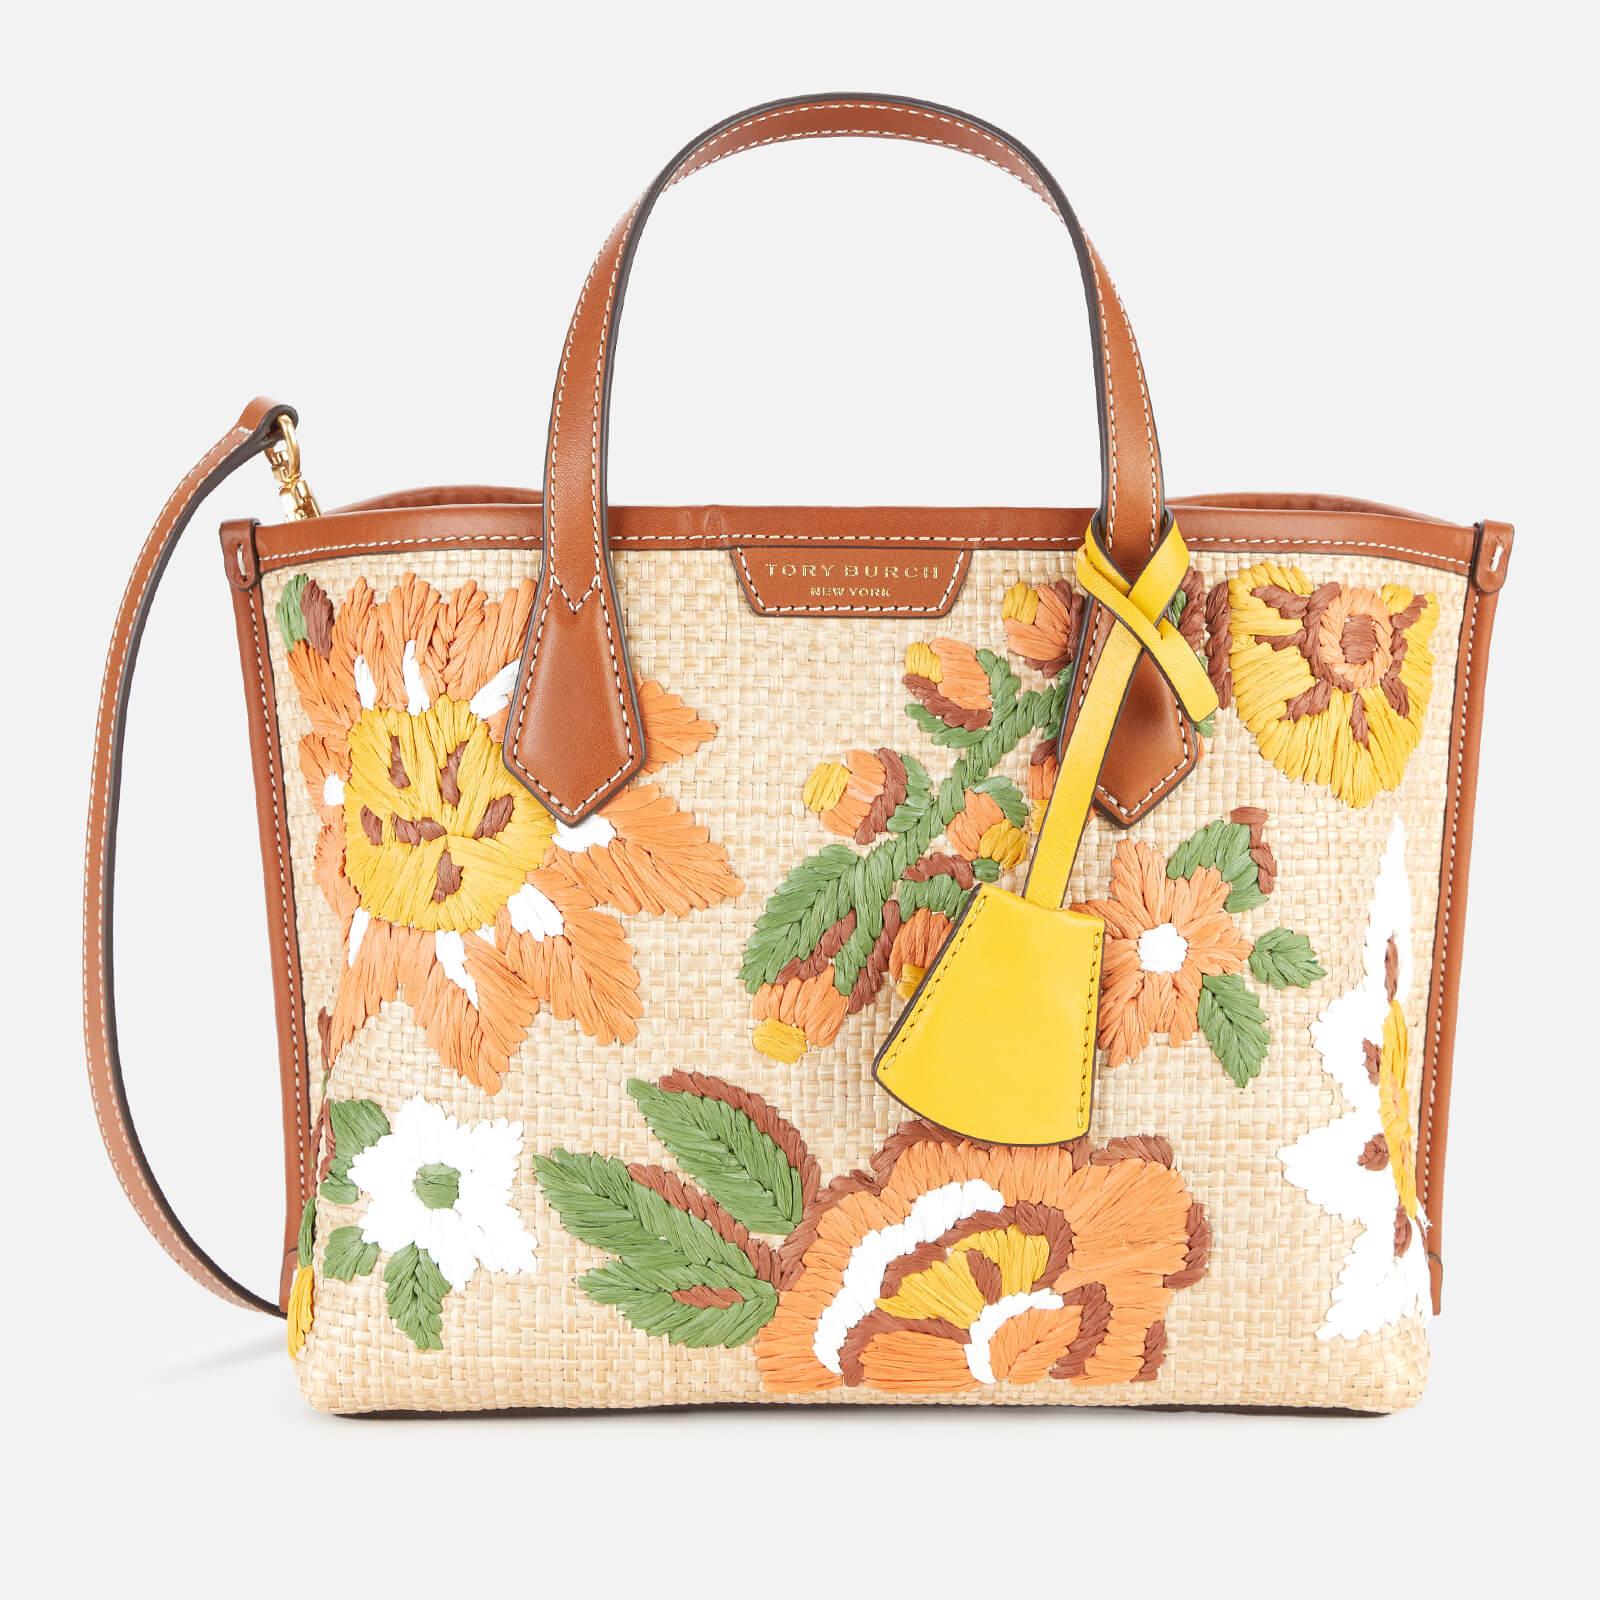 Tory Burch, Bags, Perfect Tory Burch Straw Tote For Summer